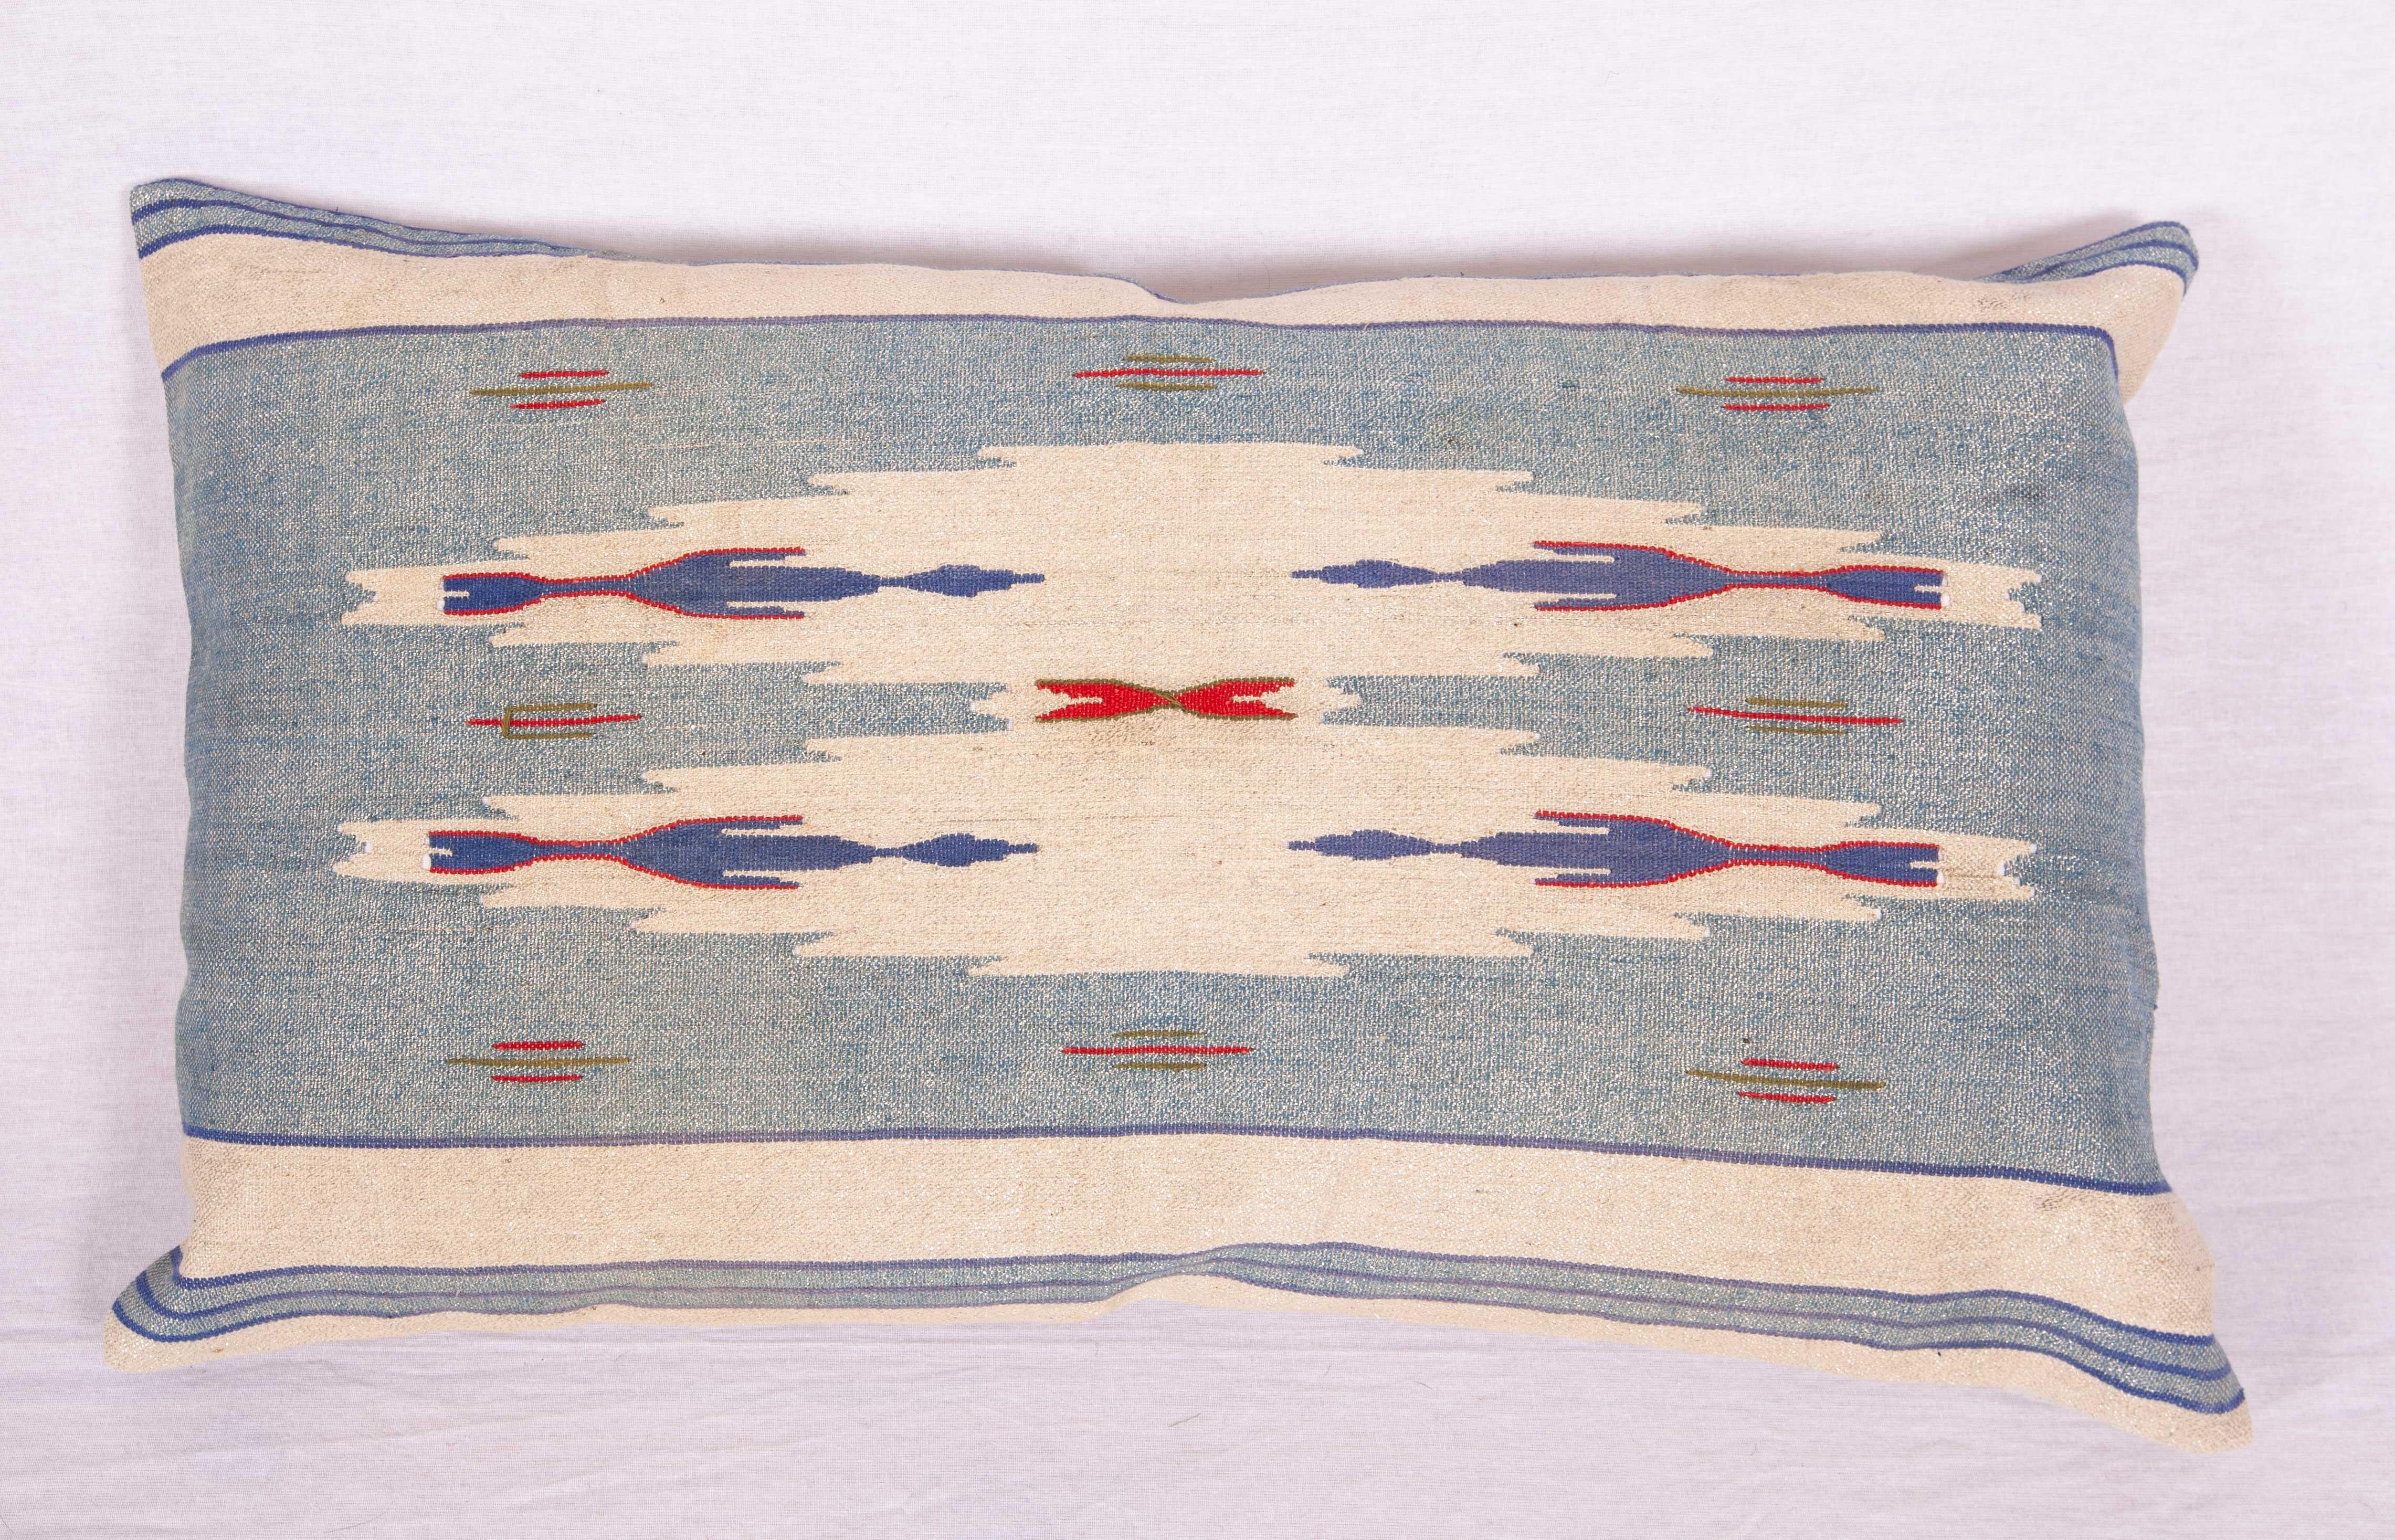 Hand-Woven Pillow Cases Fashioned from an Early 20th Century Syrian Textile